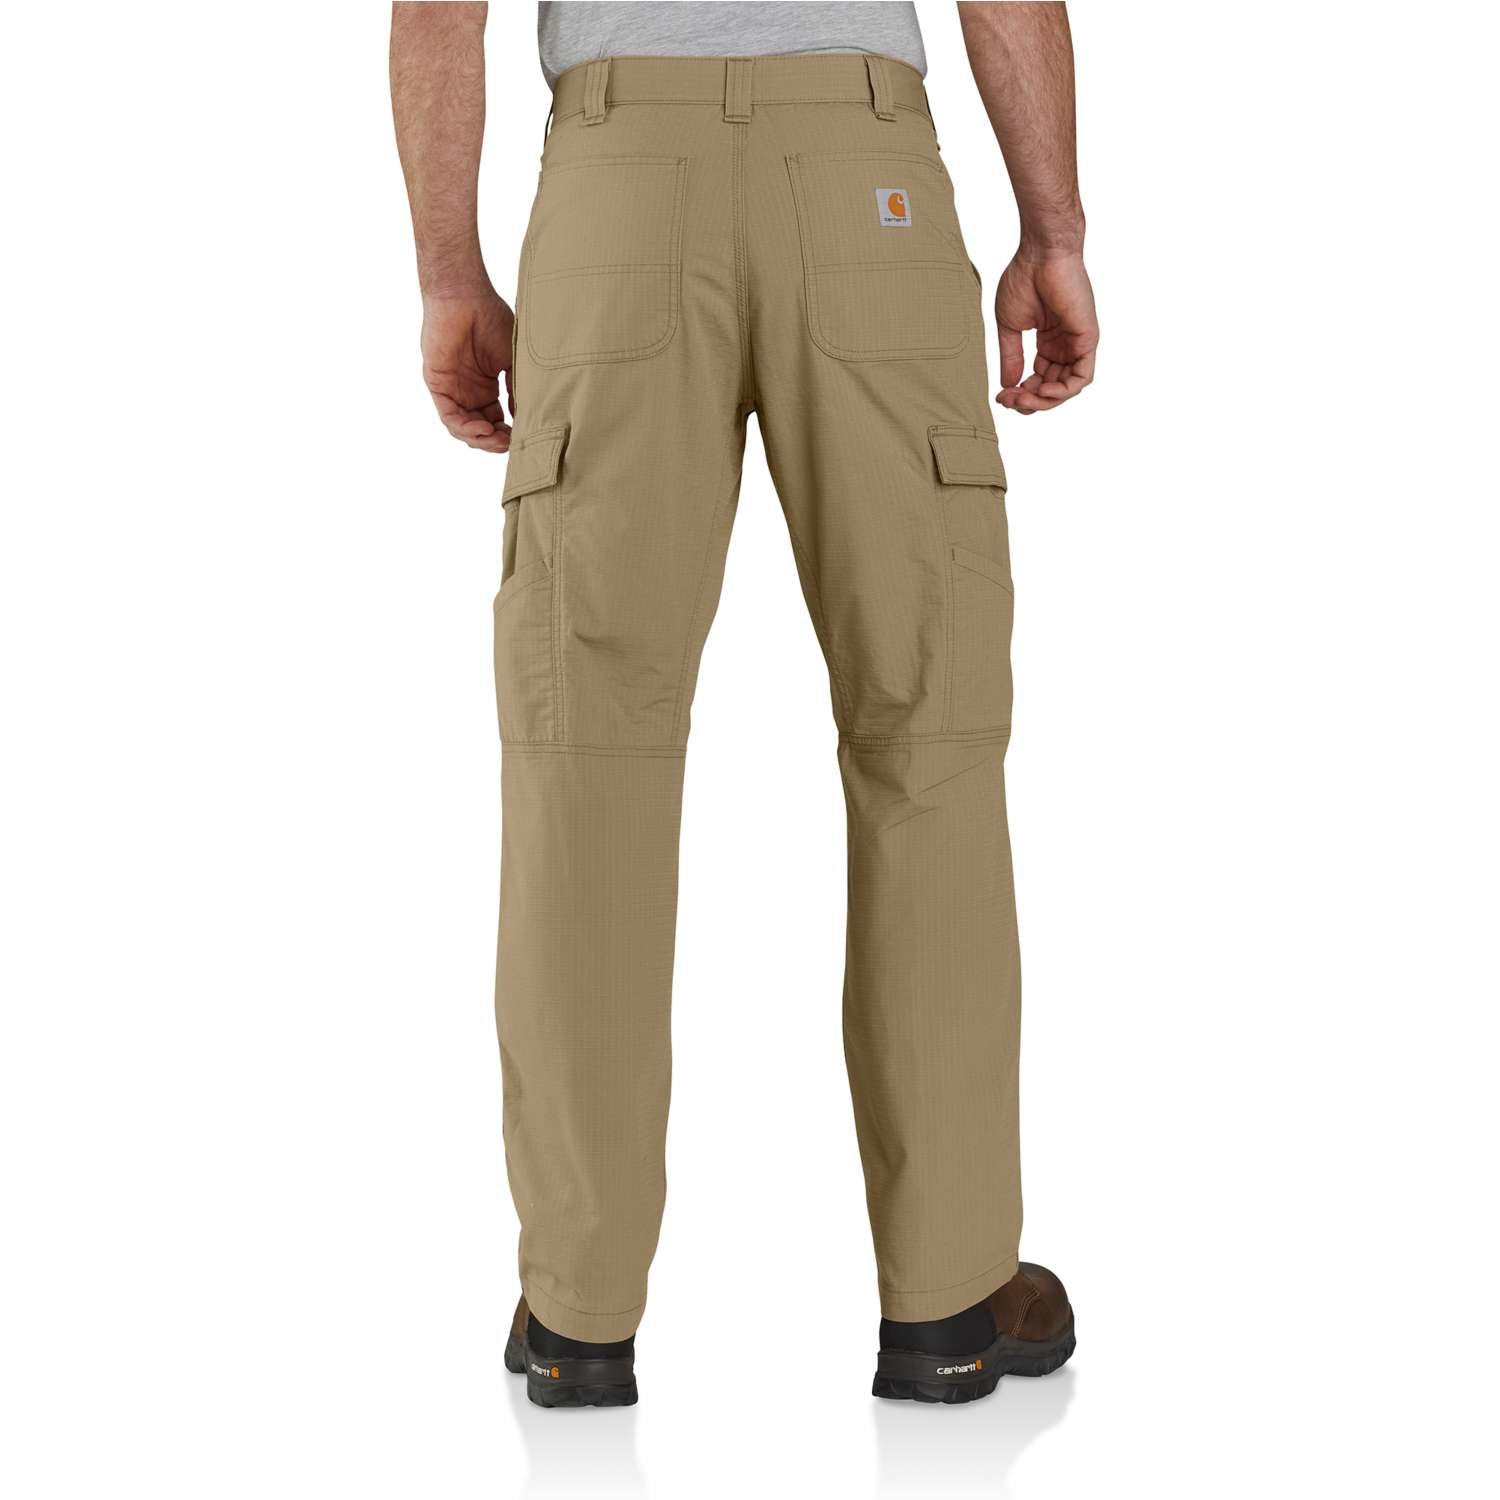 Carhartt Relaxed Fit Ripstop Cargo Pants 104200 – Good's Store Online